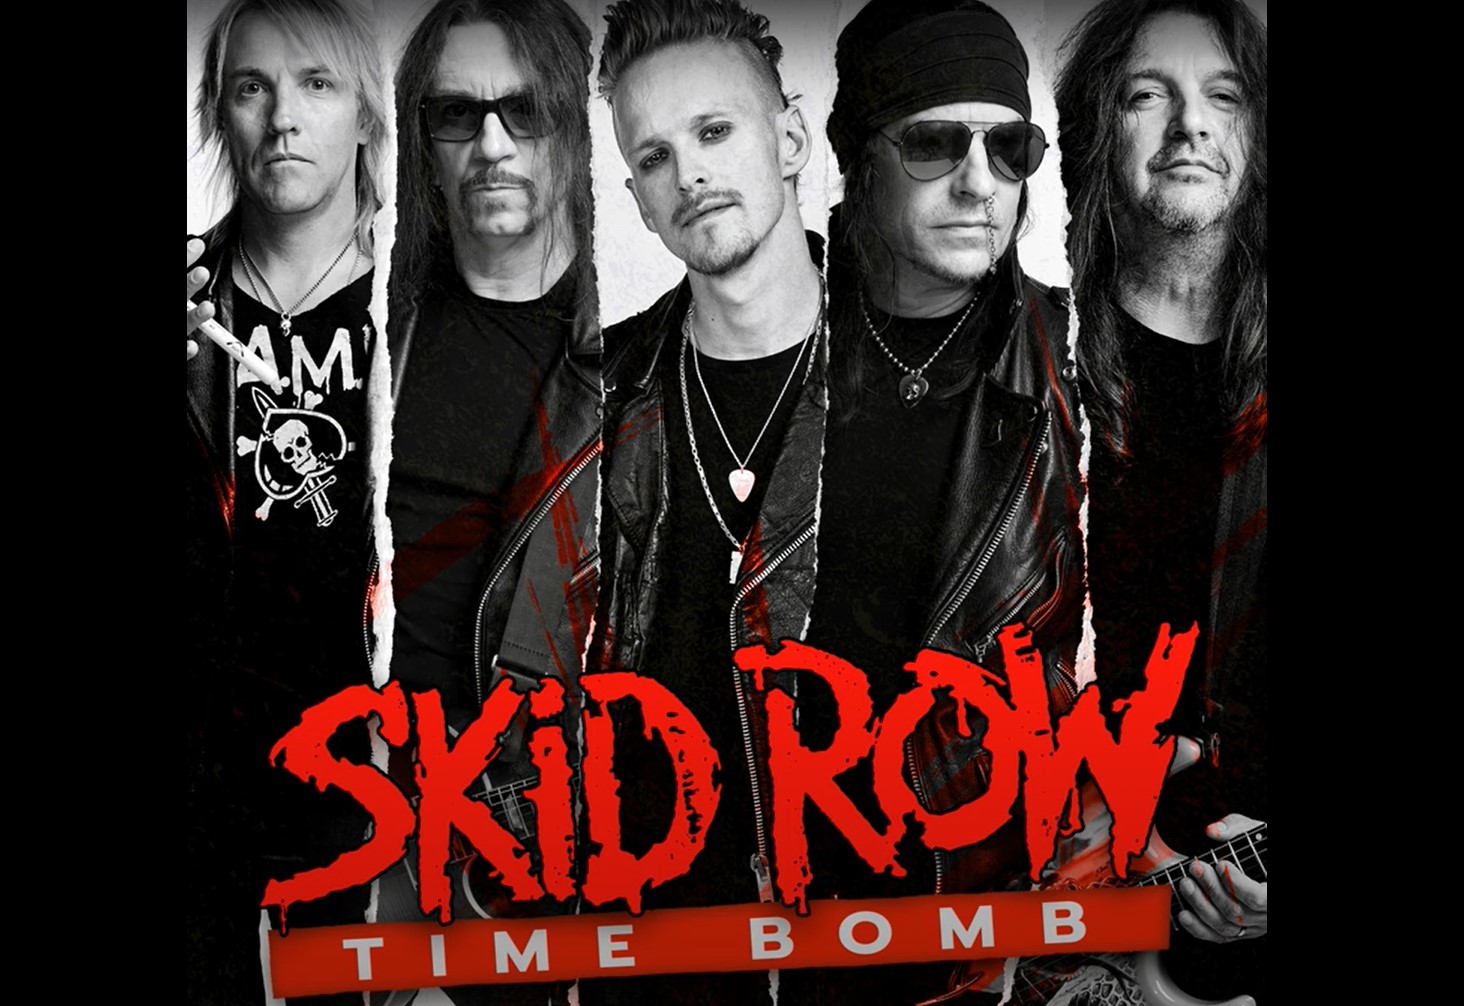 Listen To Brand New Skid Row Song "Time Bomb"!